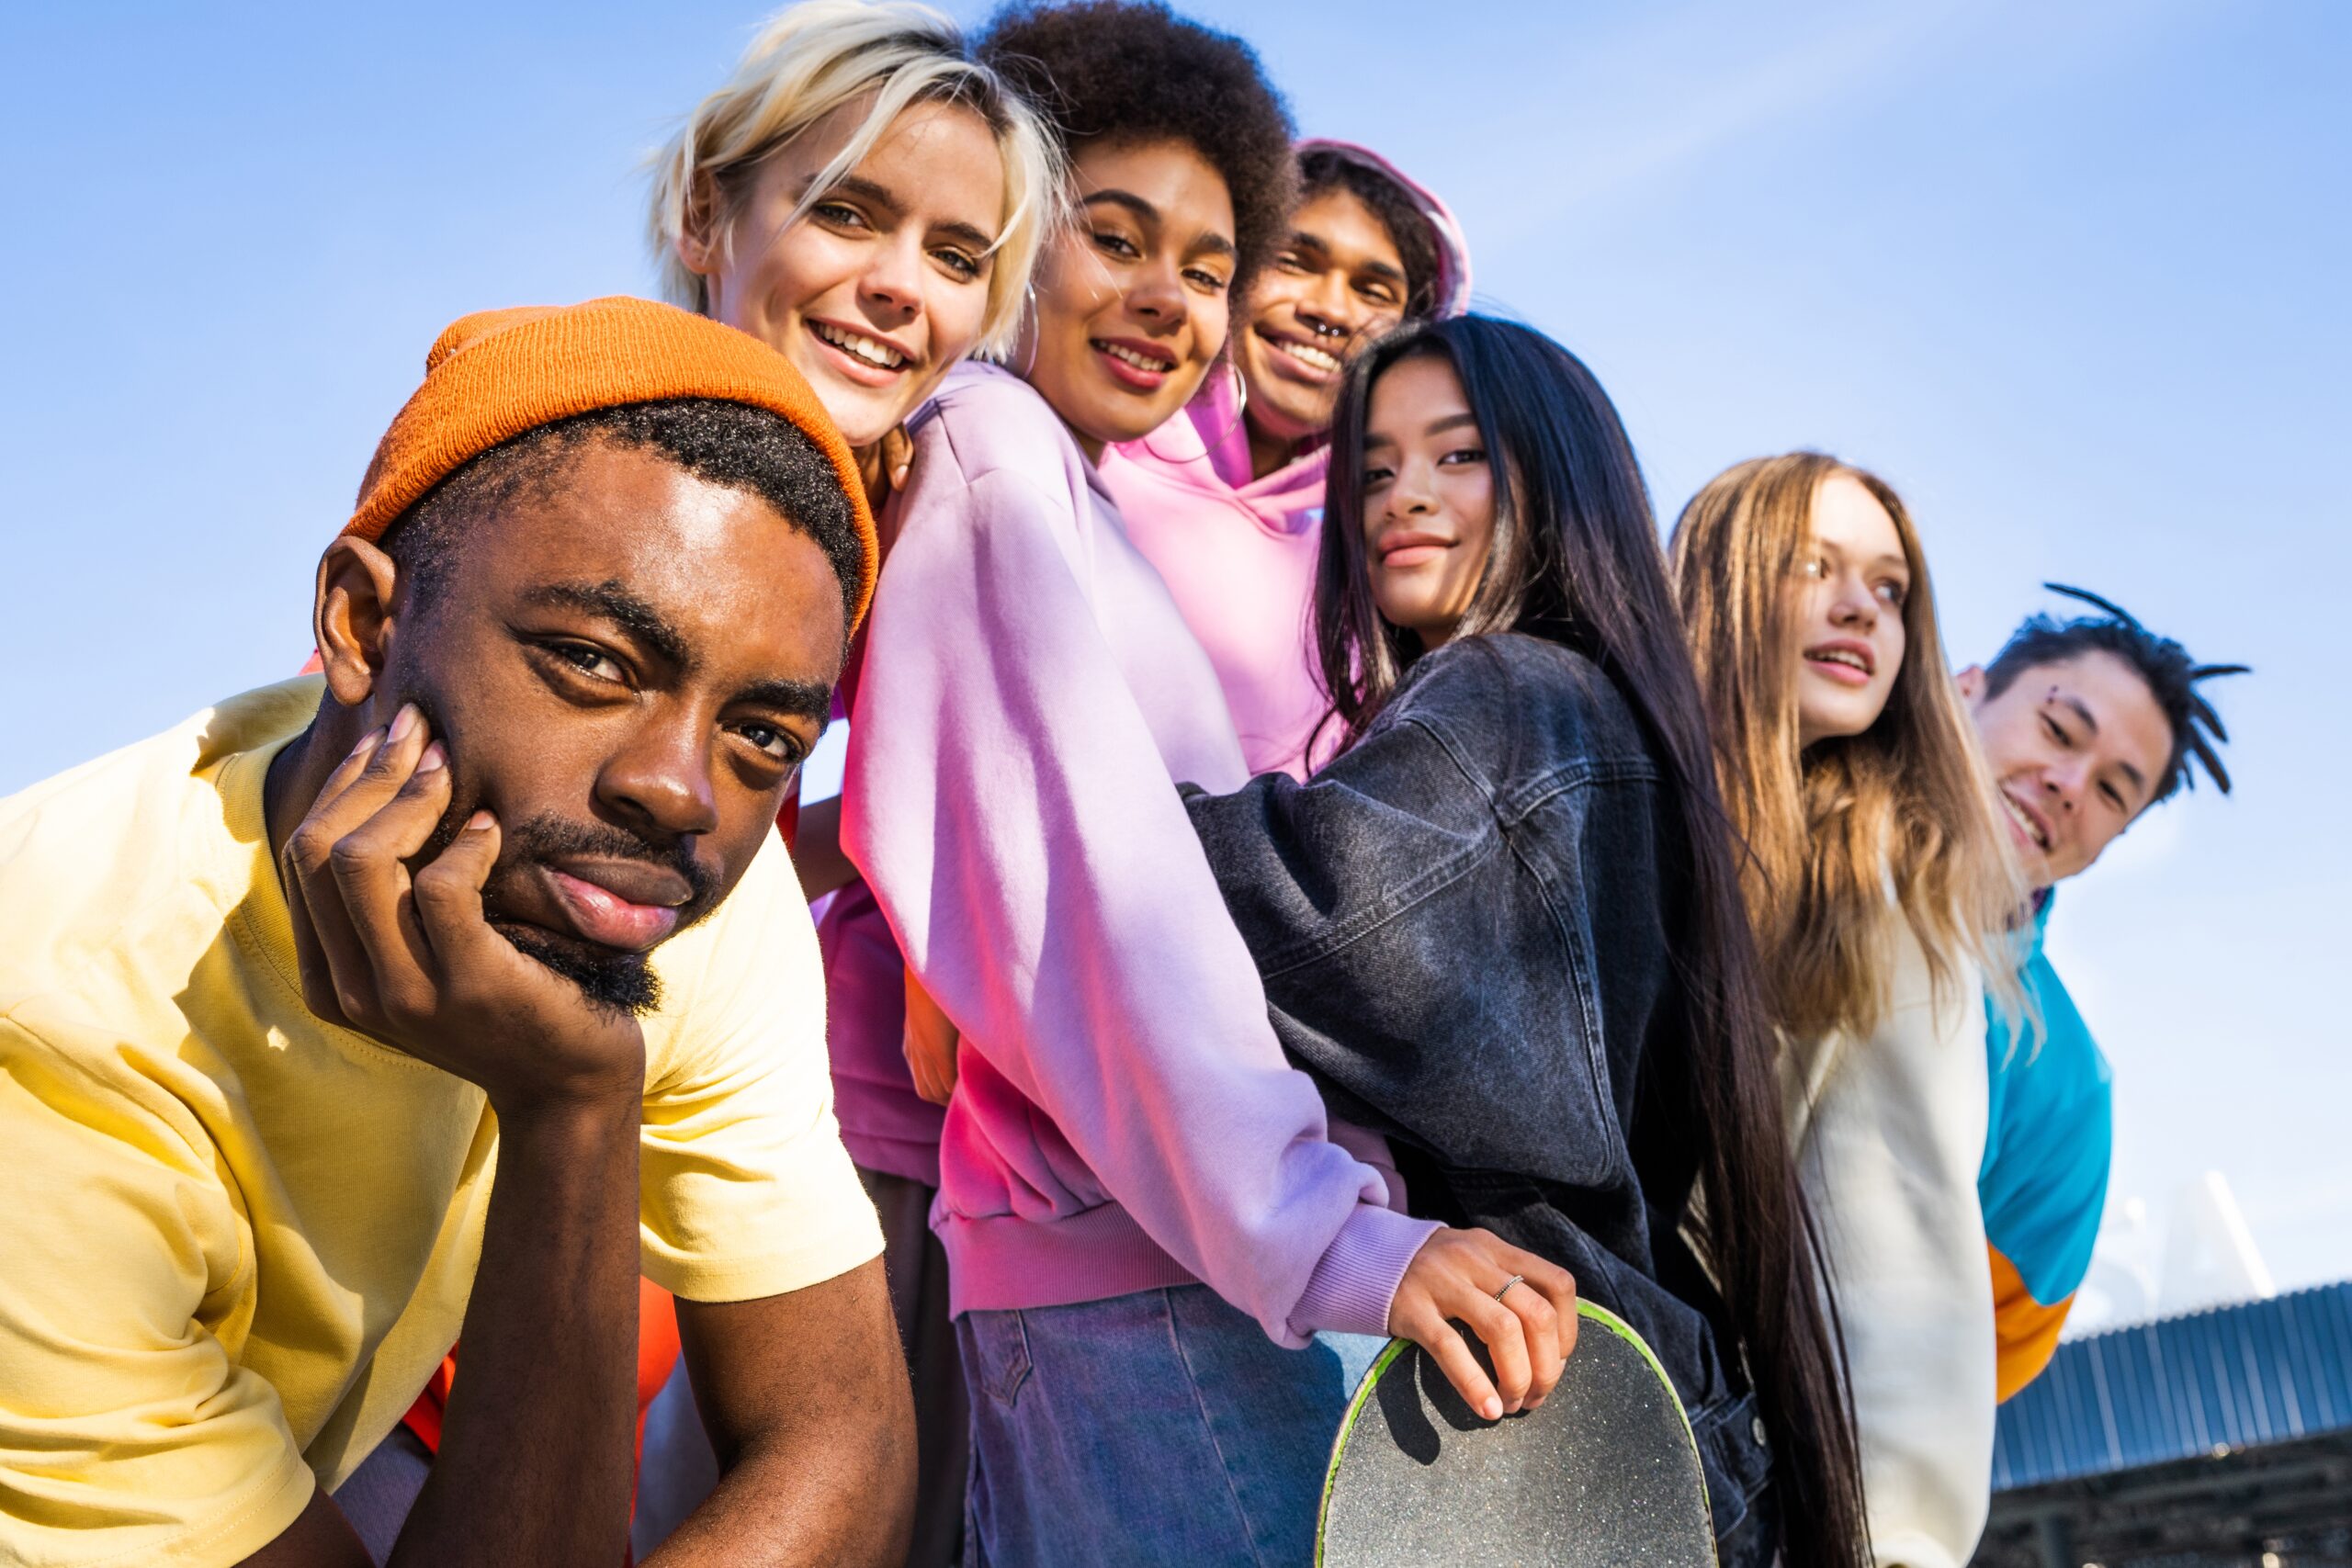 Teen Dating Violence Awareness Month | Teens gather in support of violence prevention education and workshops in schools | Teen dating violence prevention